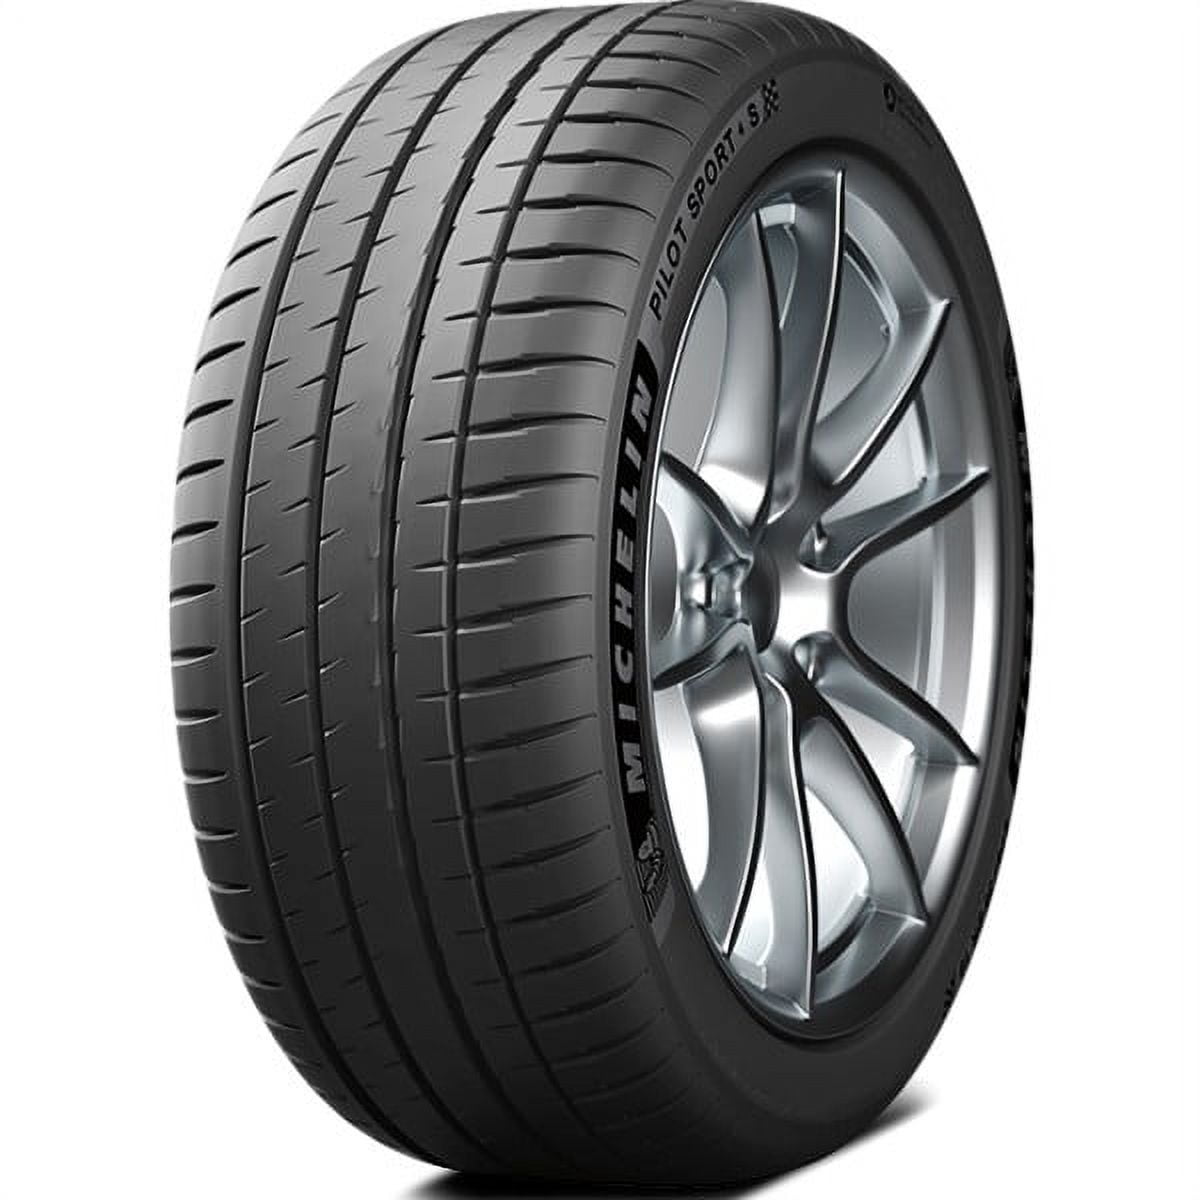 / MH43847 Titanium, Civic Touring / 4 235/40/18 2354018 Summer Sport Sport 235/40R18 Max Ford Honda MILE Michelin 4S Fits: of 2017-23 Focus 95Y Performance Pilot Tires 2012-18 Set 30000